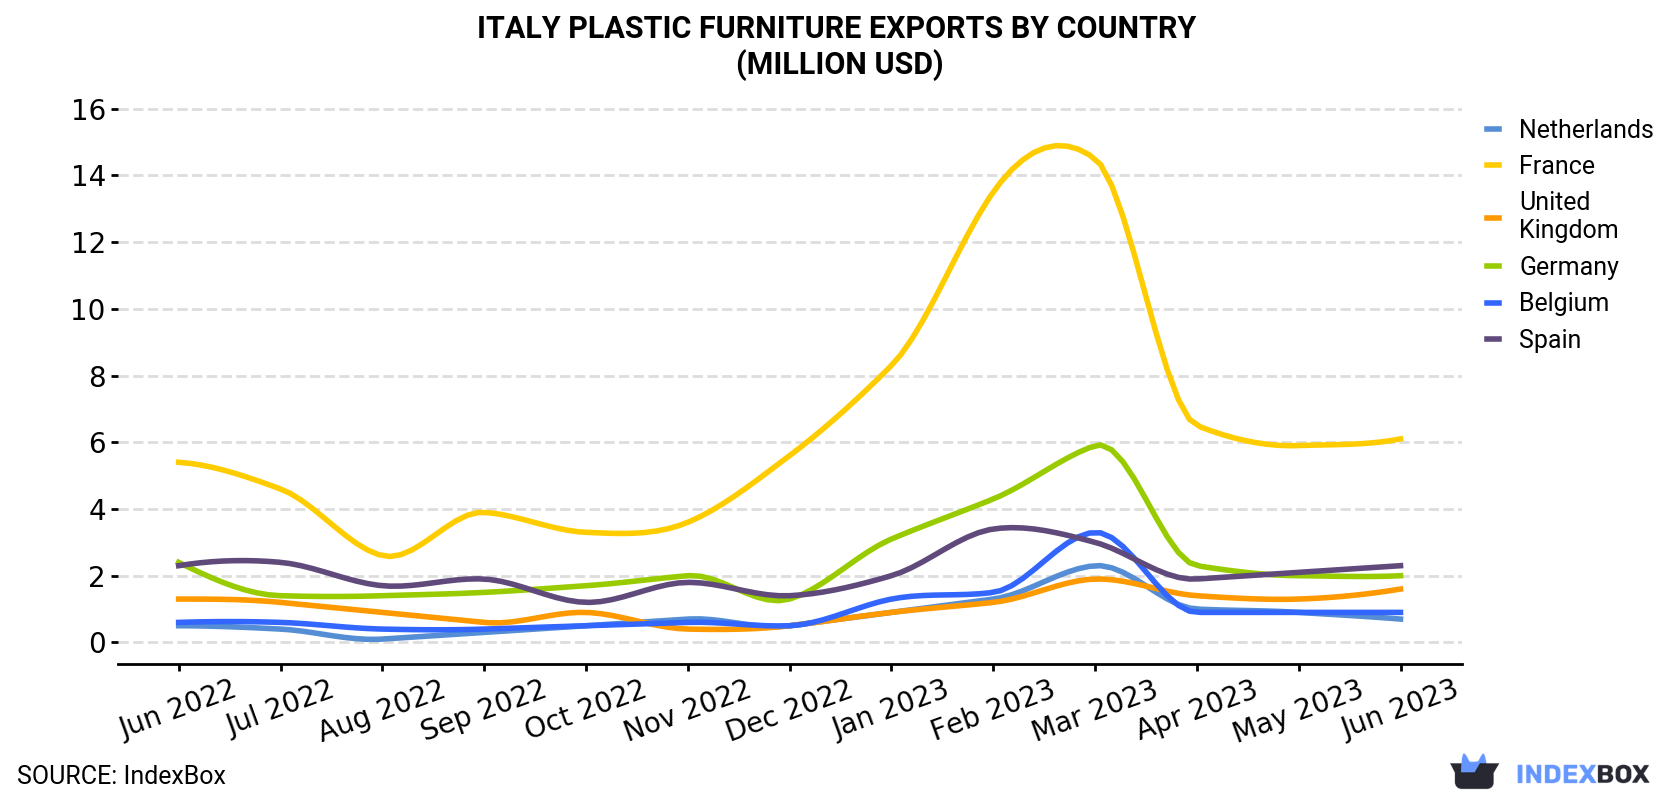 Italy Plastic Furniture Exports By Country (Million USD)